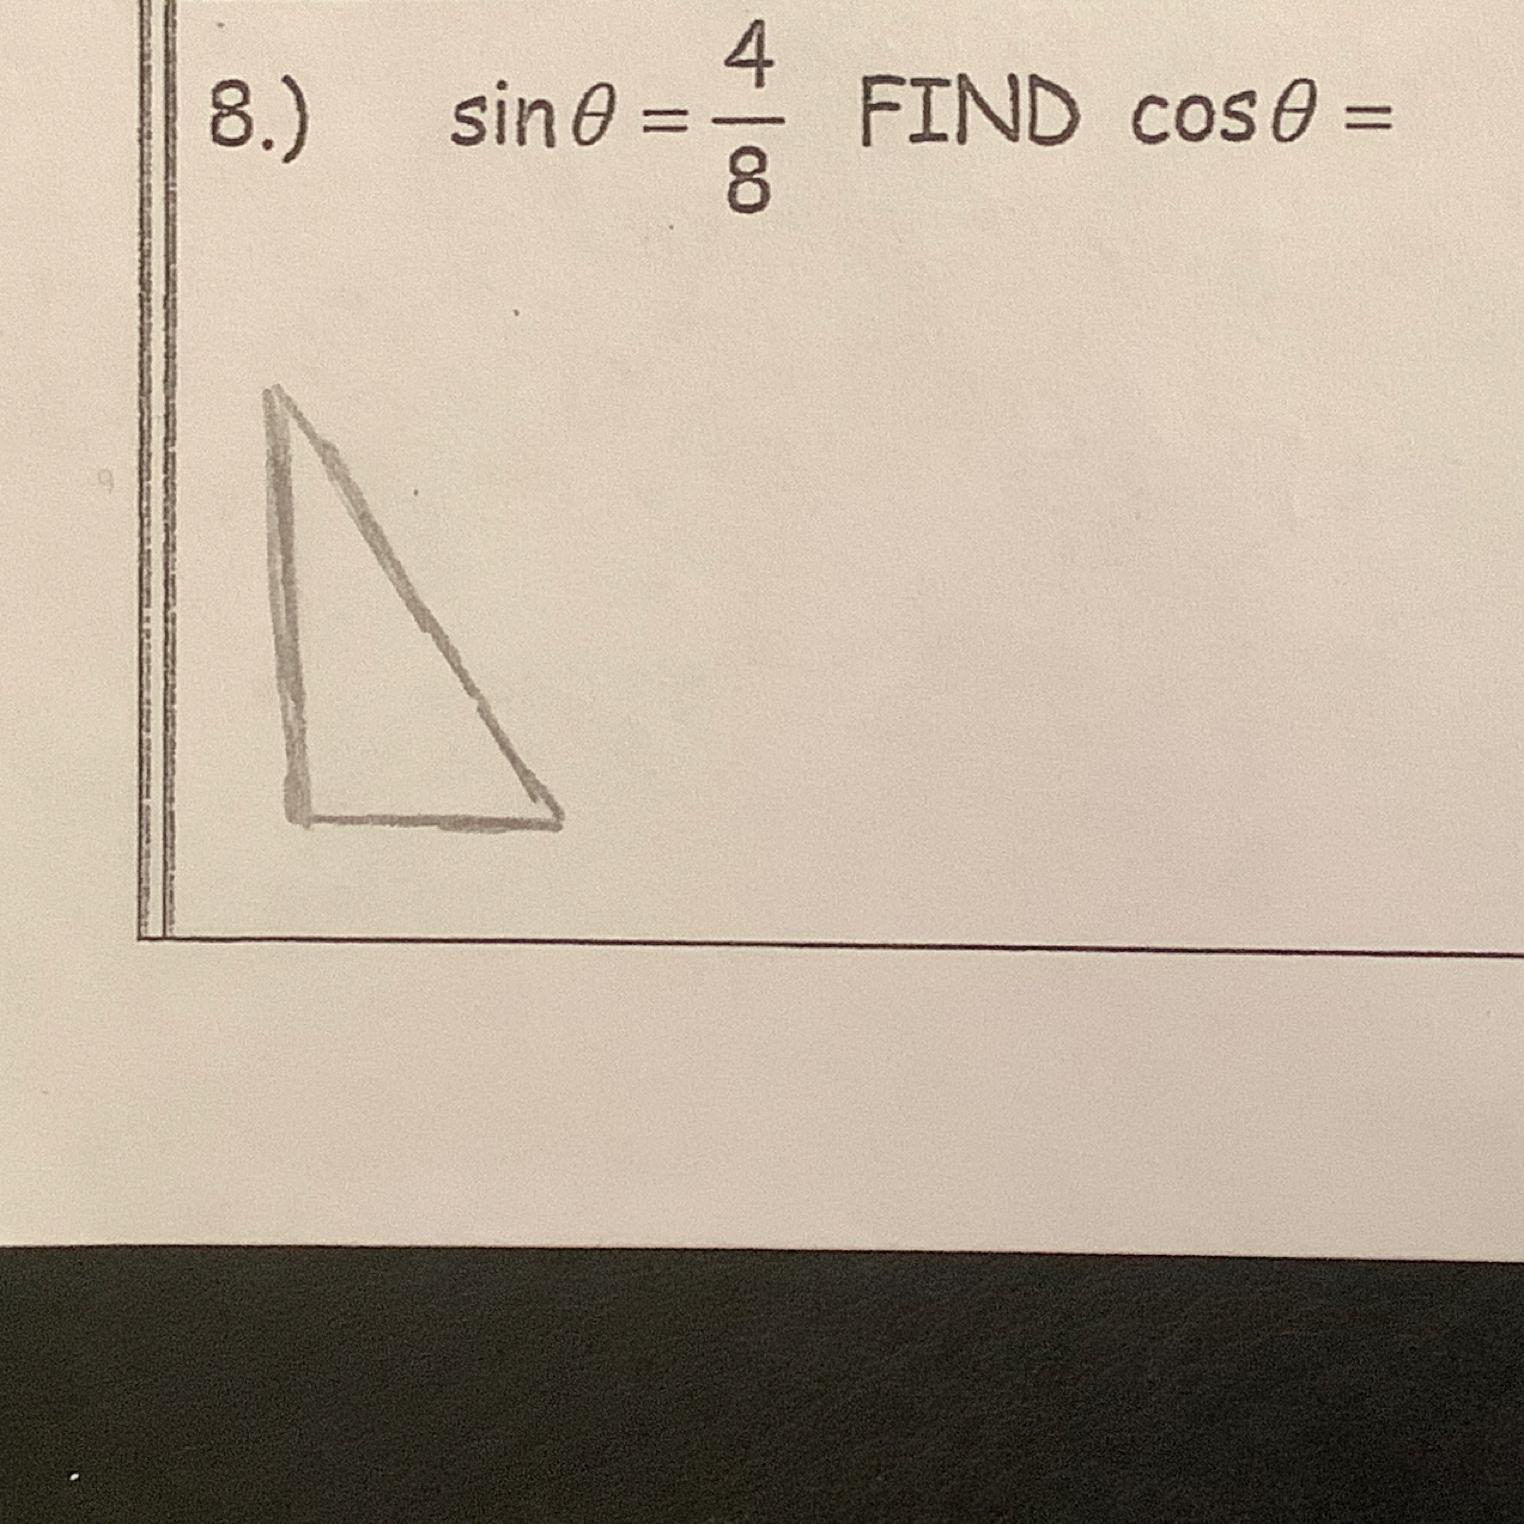 Draw The Triangle And Find The Missing Side Then Find The Indicated Trigonometric Value. How Do I Solve